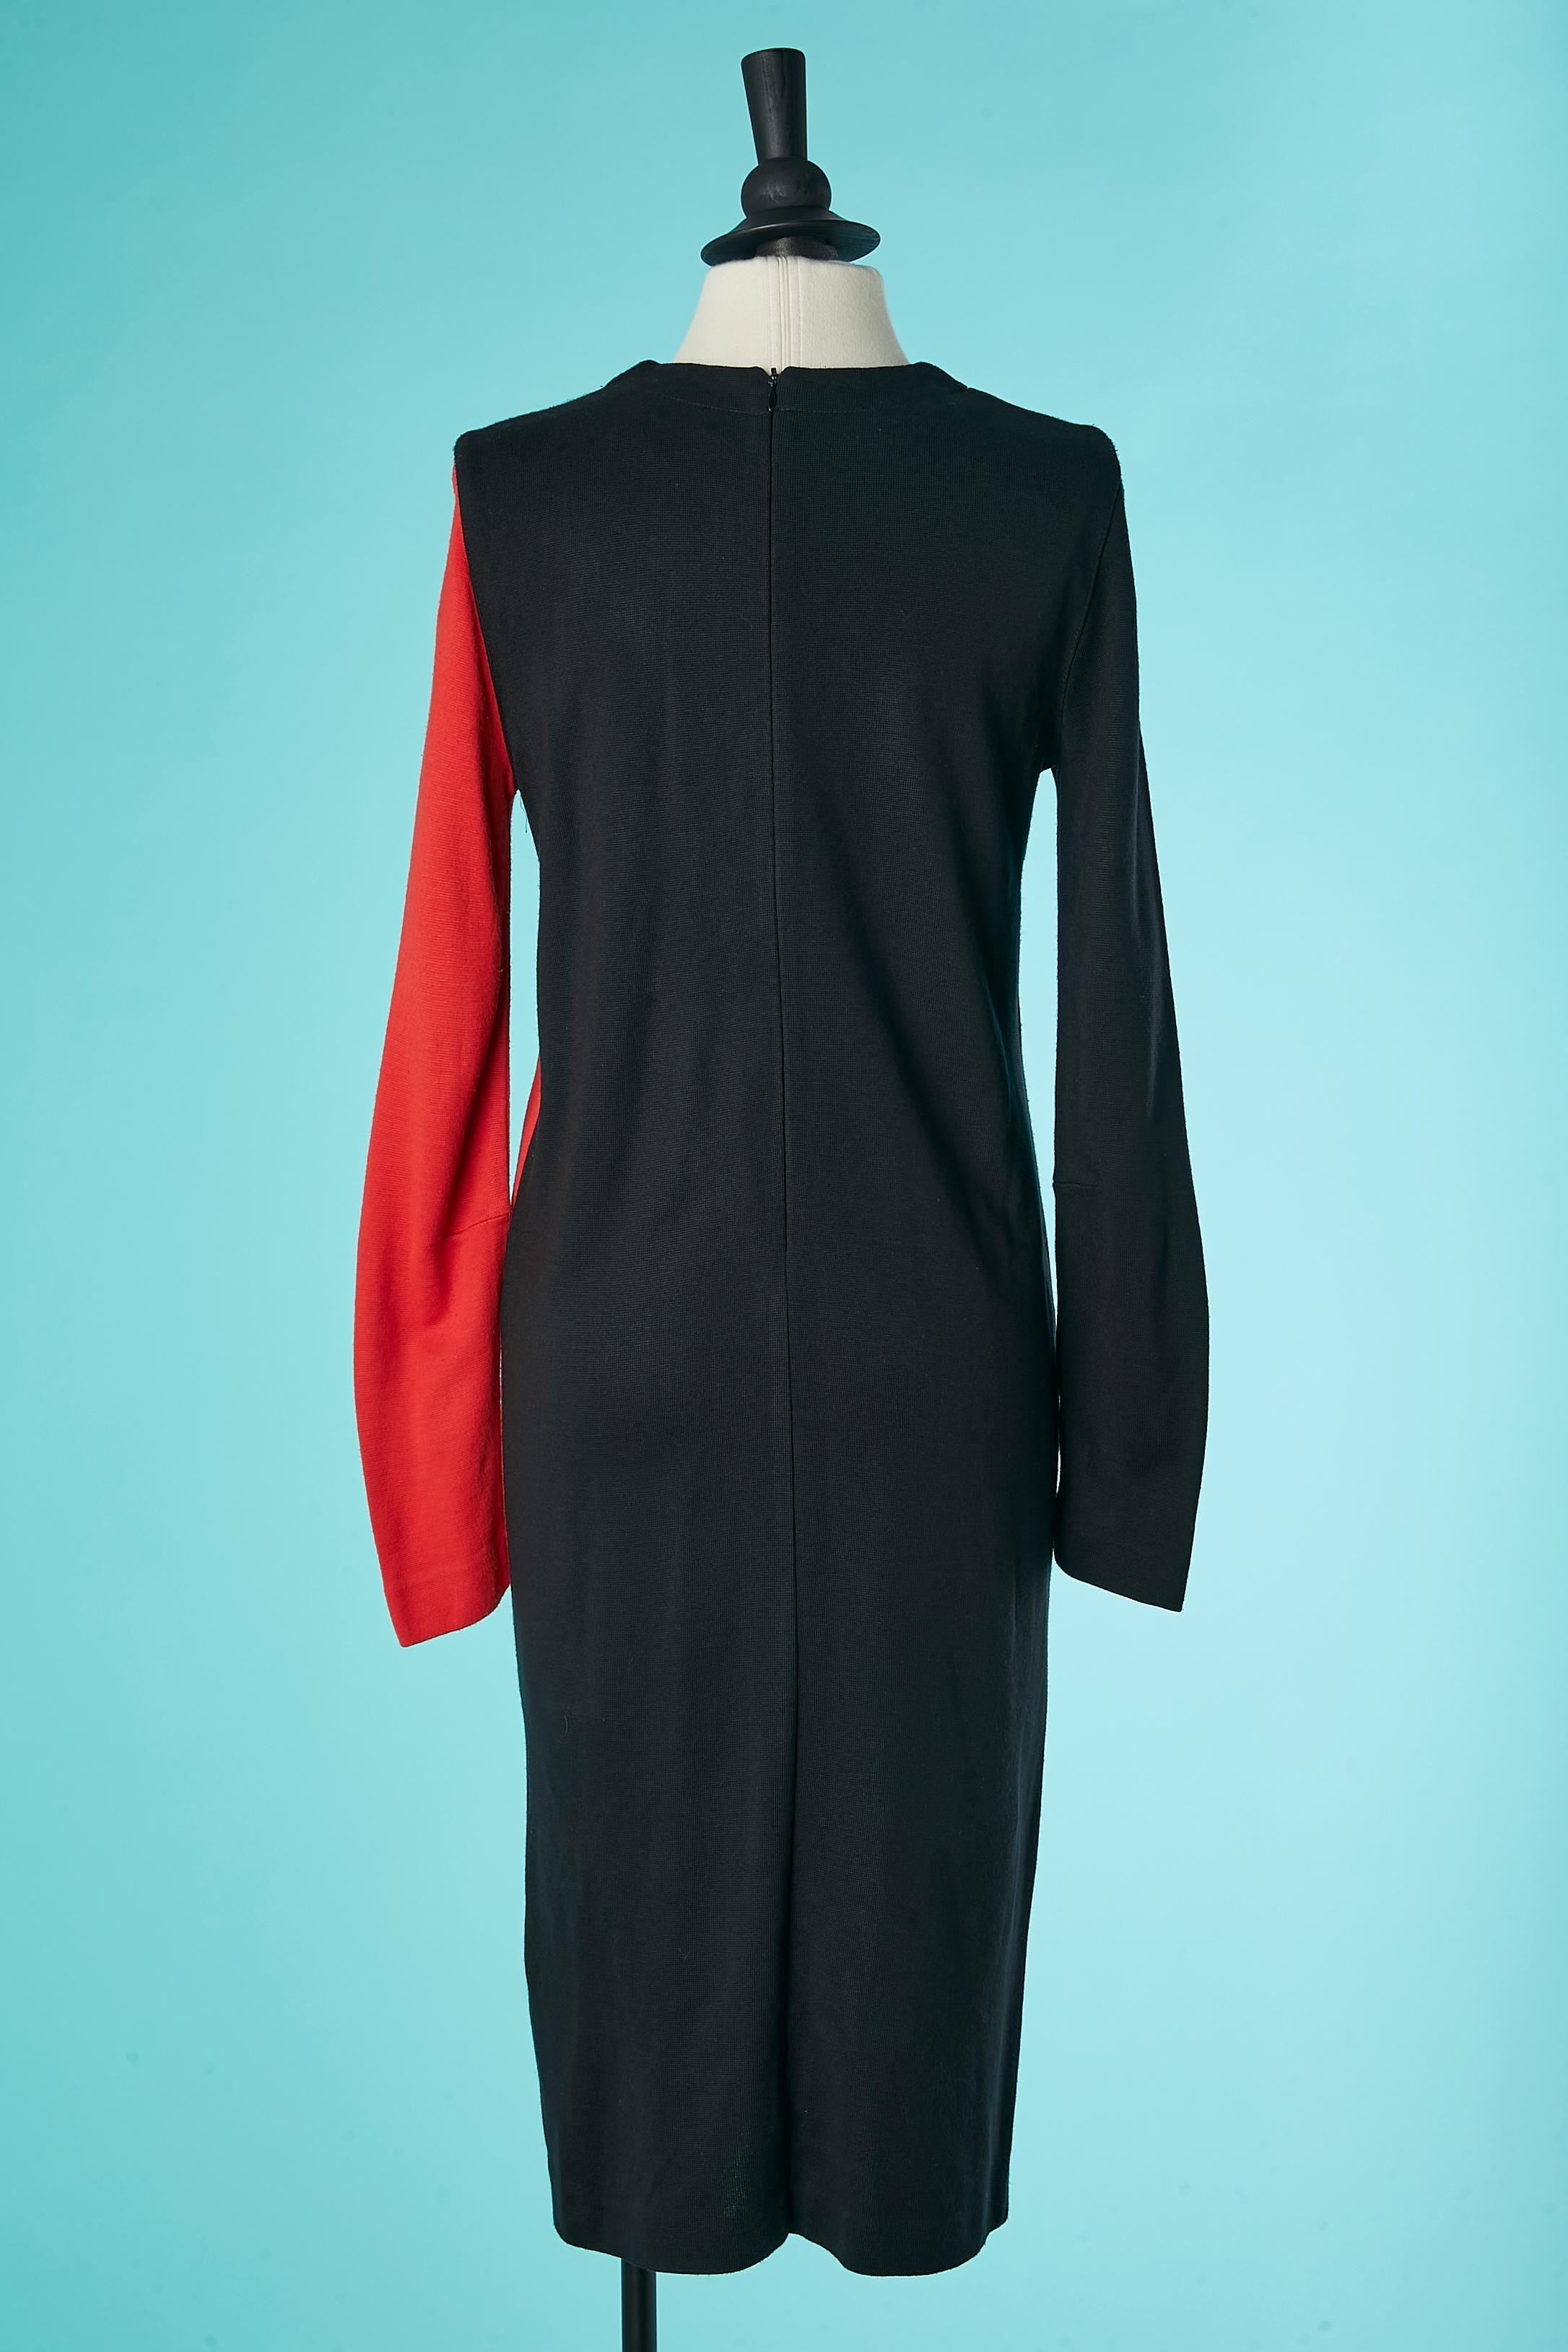 Women's Black and red jersey dress with decorative buttons Pierre Cardin 600€ For Sale